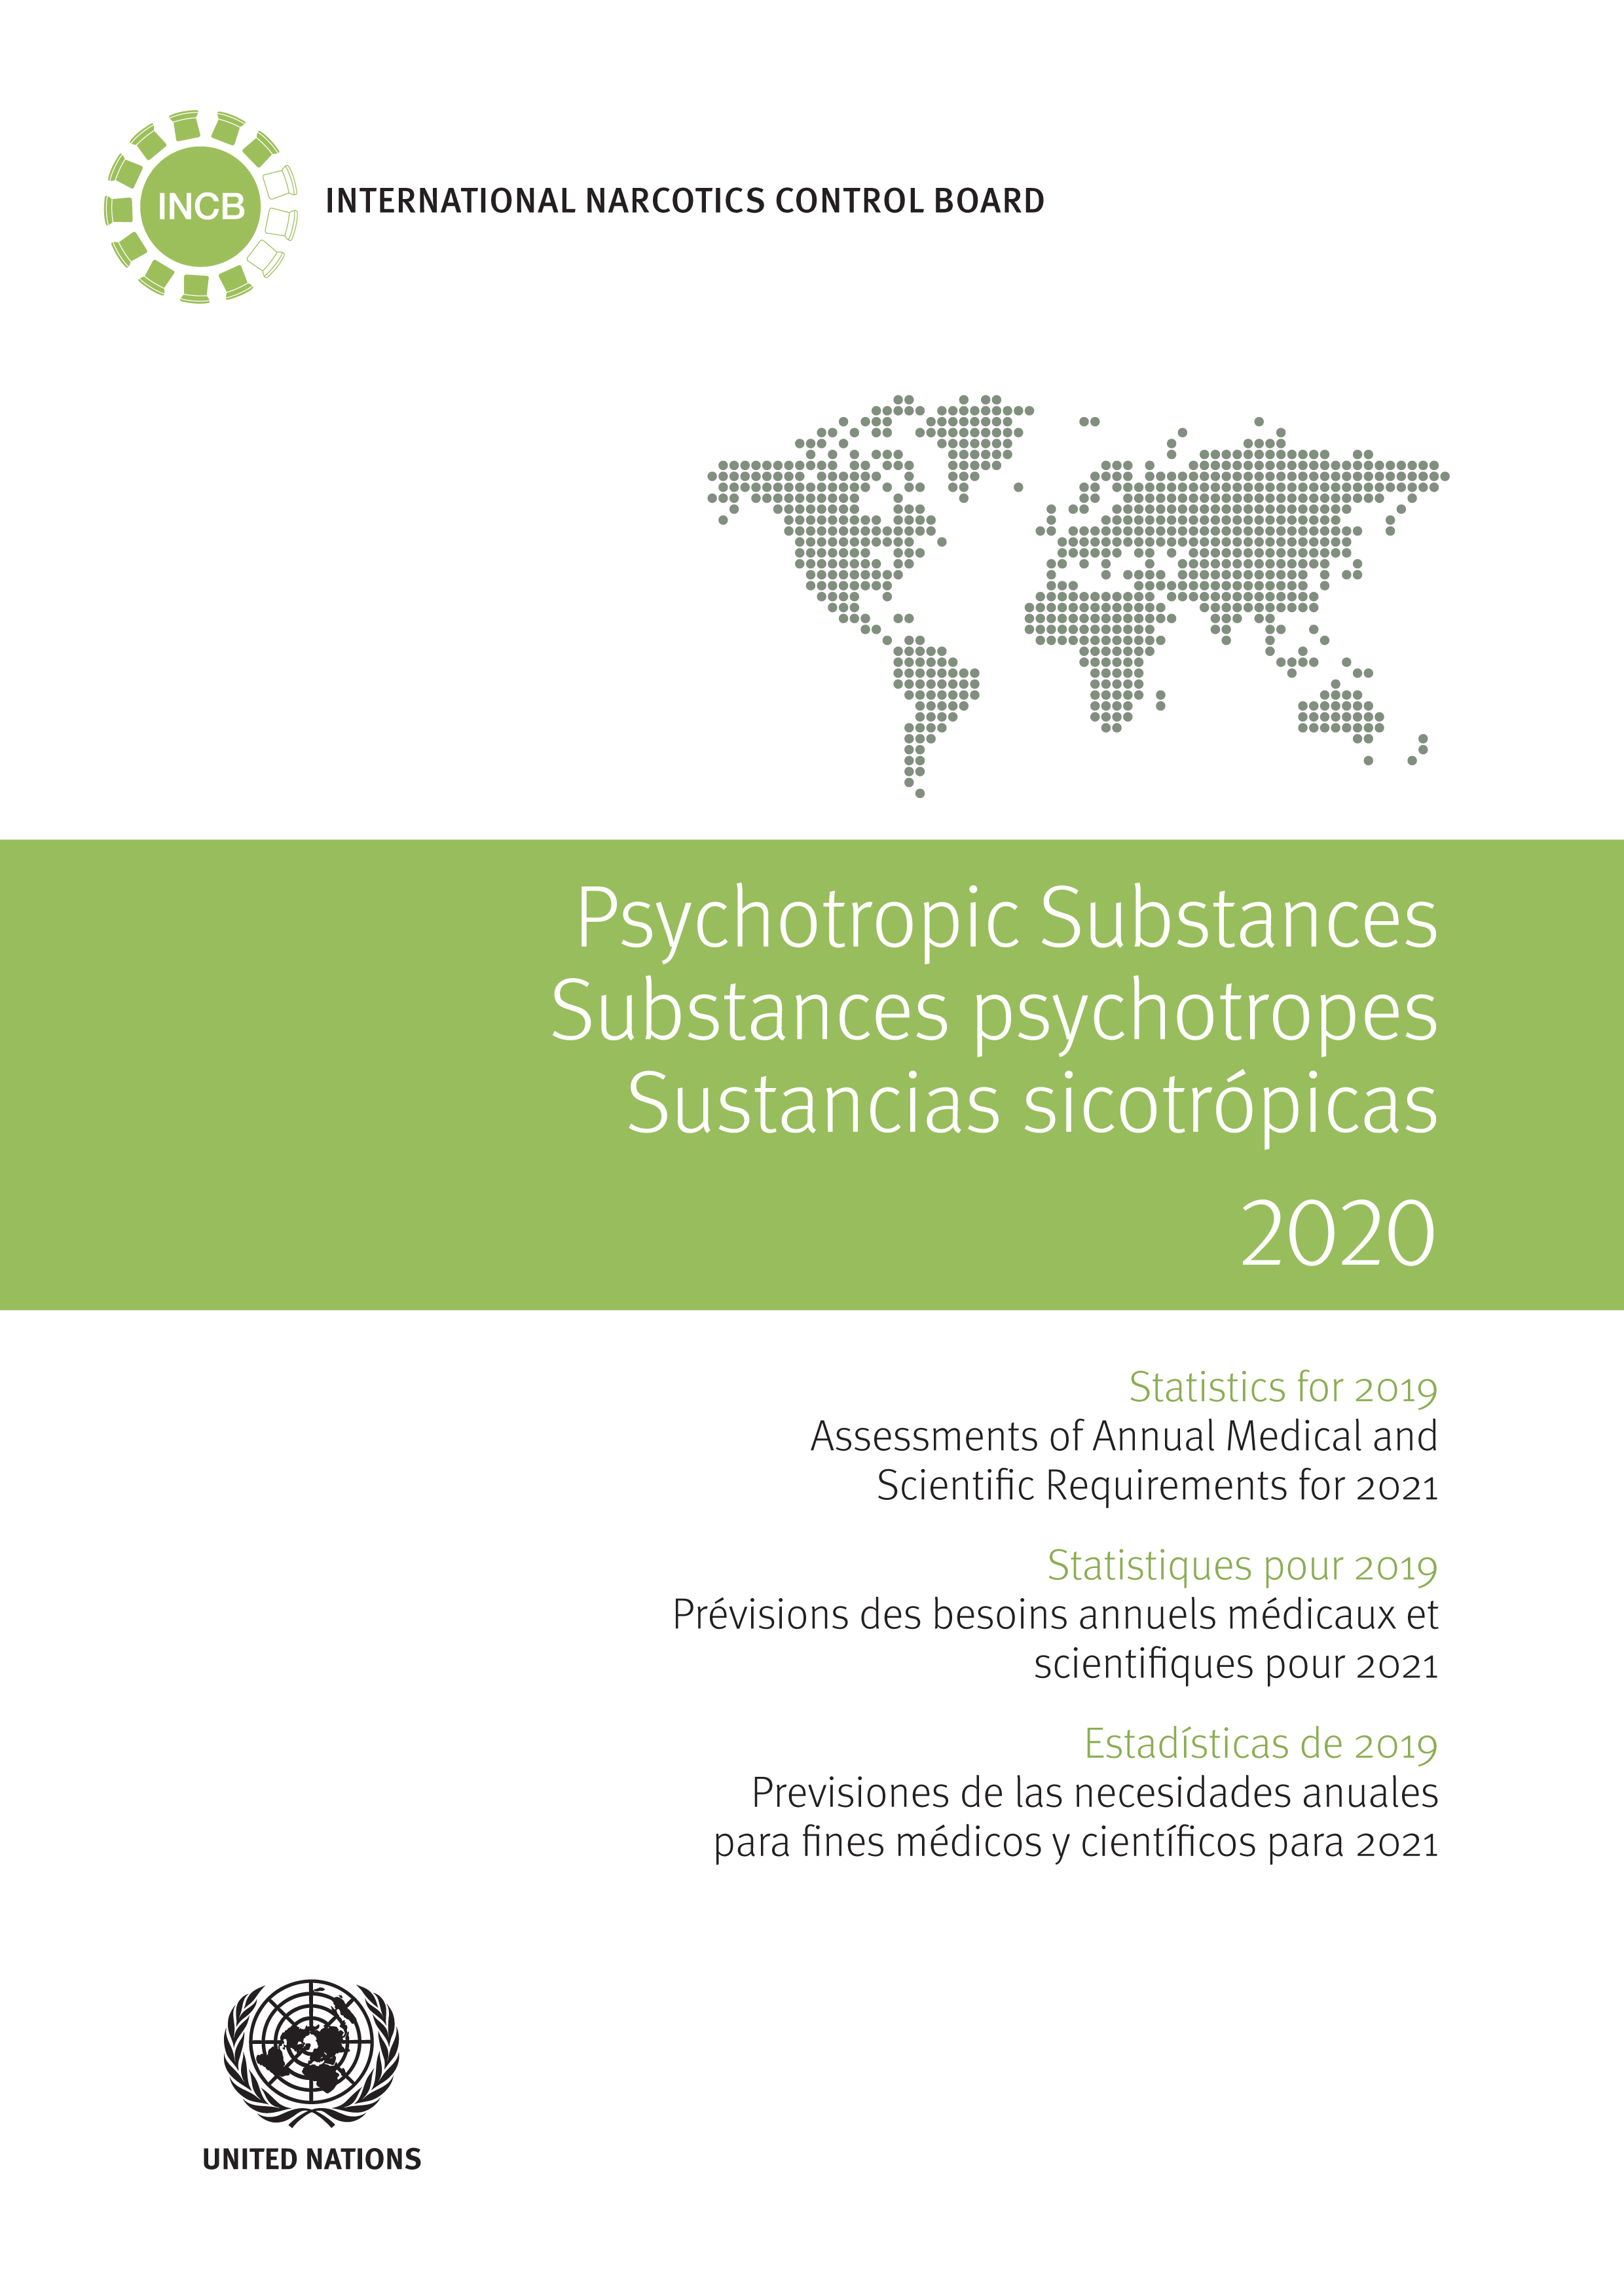 image of Assessments of domestic annual medical and scientific requirements for 2021 for substances listed in Schedules II, III and IV of the Convention on Psychotropic Substances of 1971